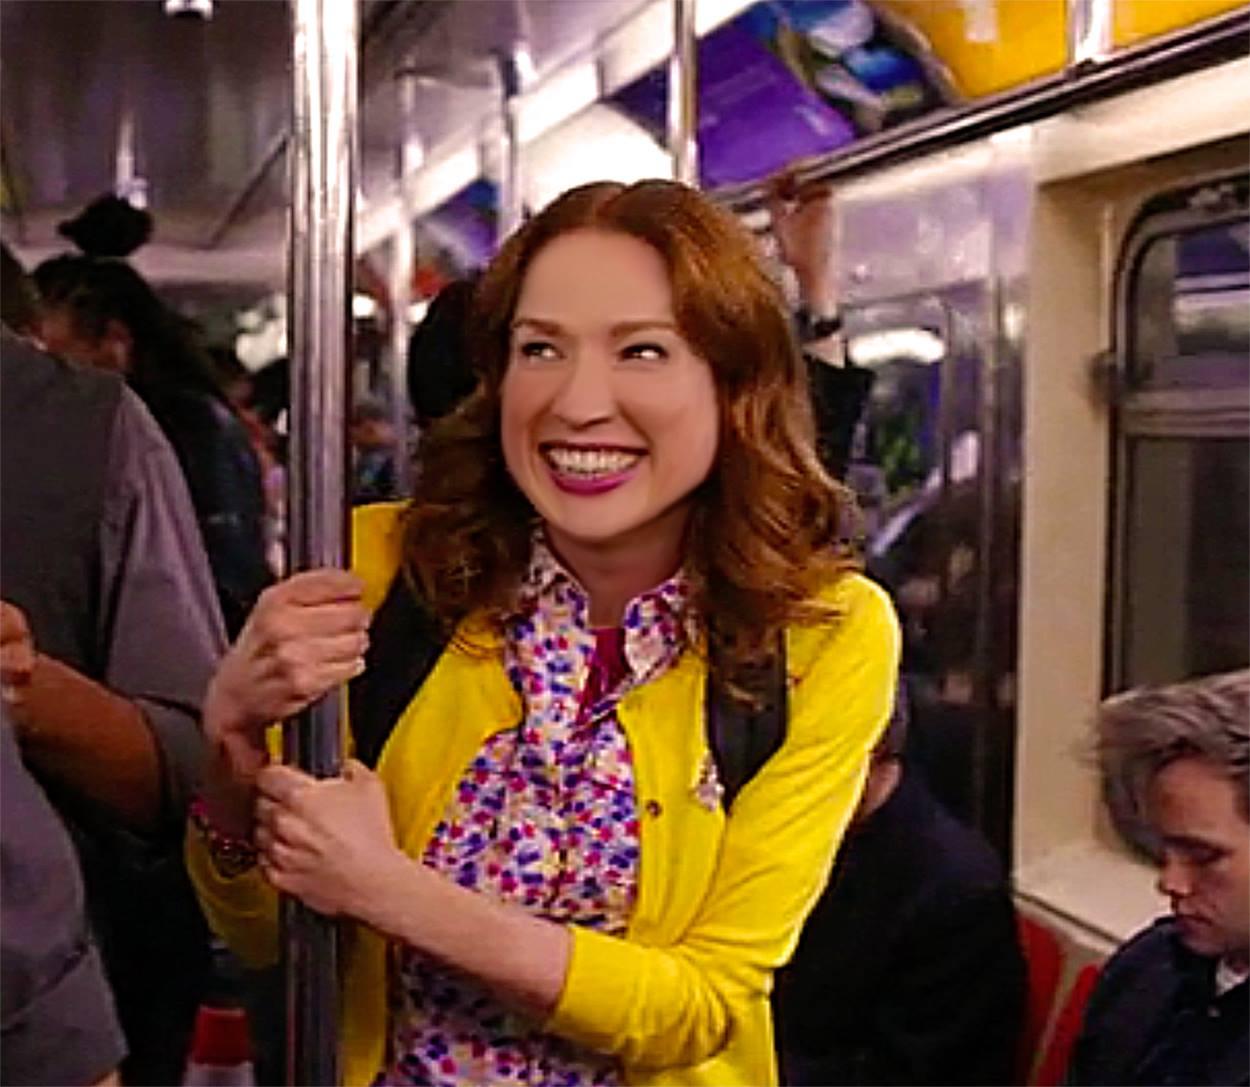 Unbreakable Kimmy Schmidt takes on women's trauma and healing